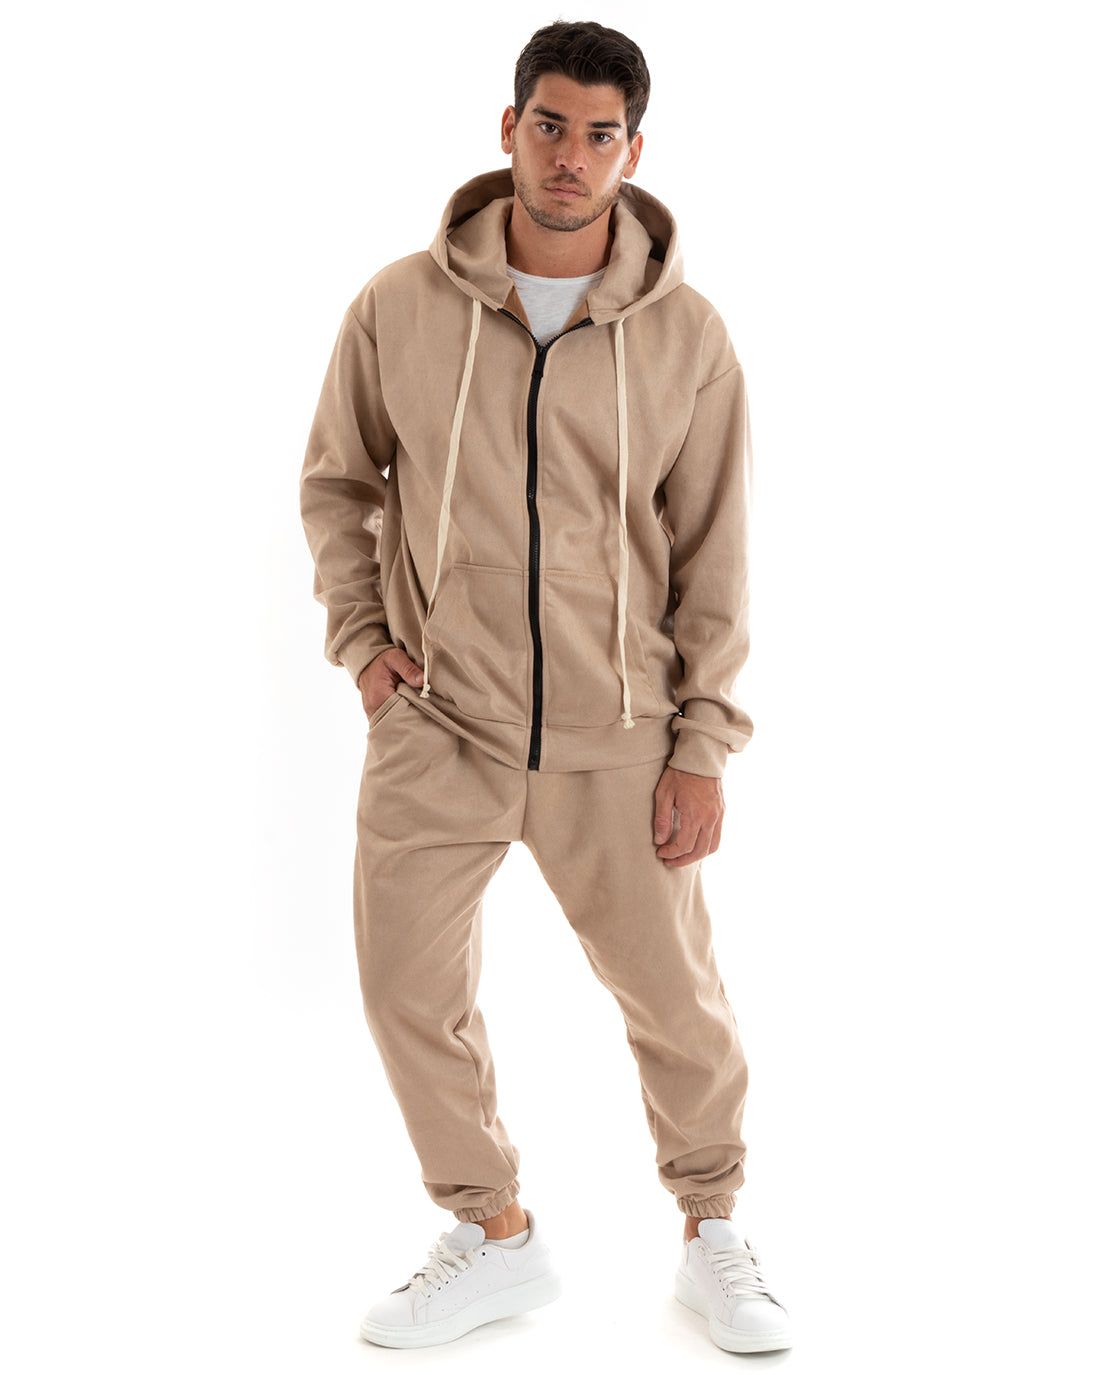 Men's Tracksuit Set, Hooded Sweatshirt and Zip Trousers with Drawstring Waist in Beige Eco Suede GIOSAL-OU2395A